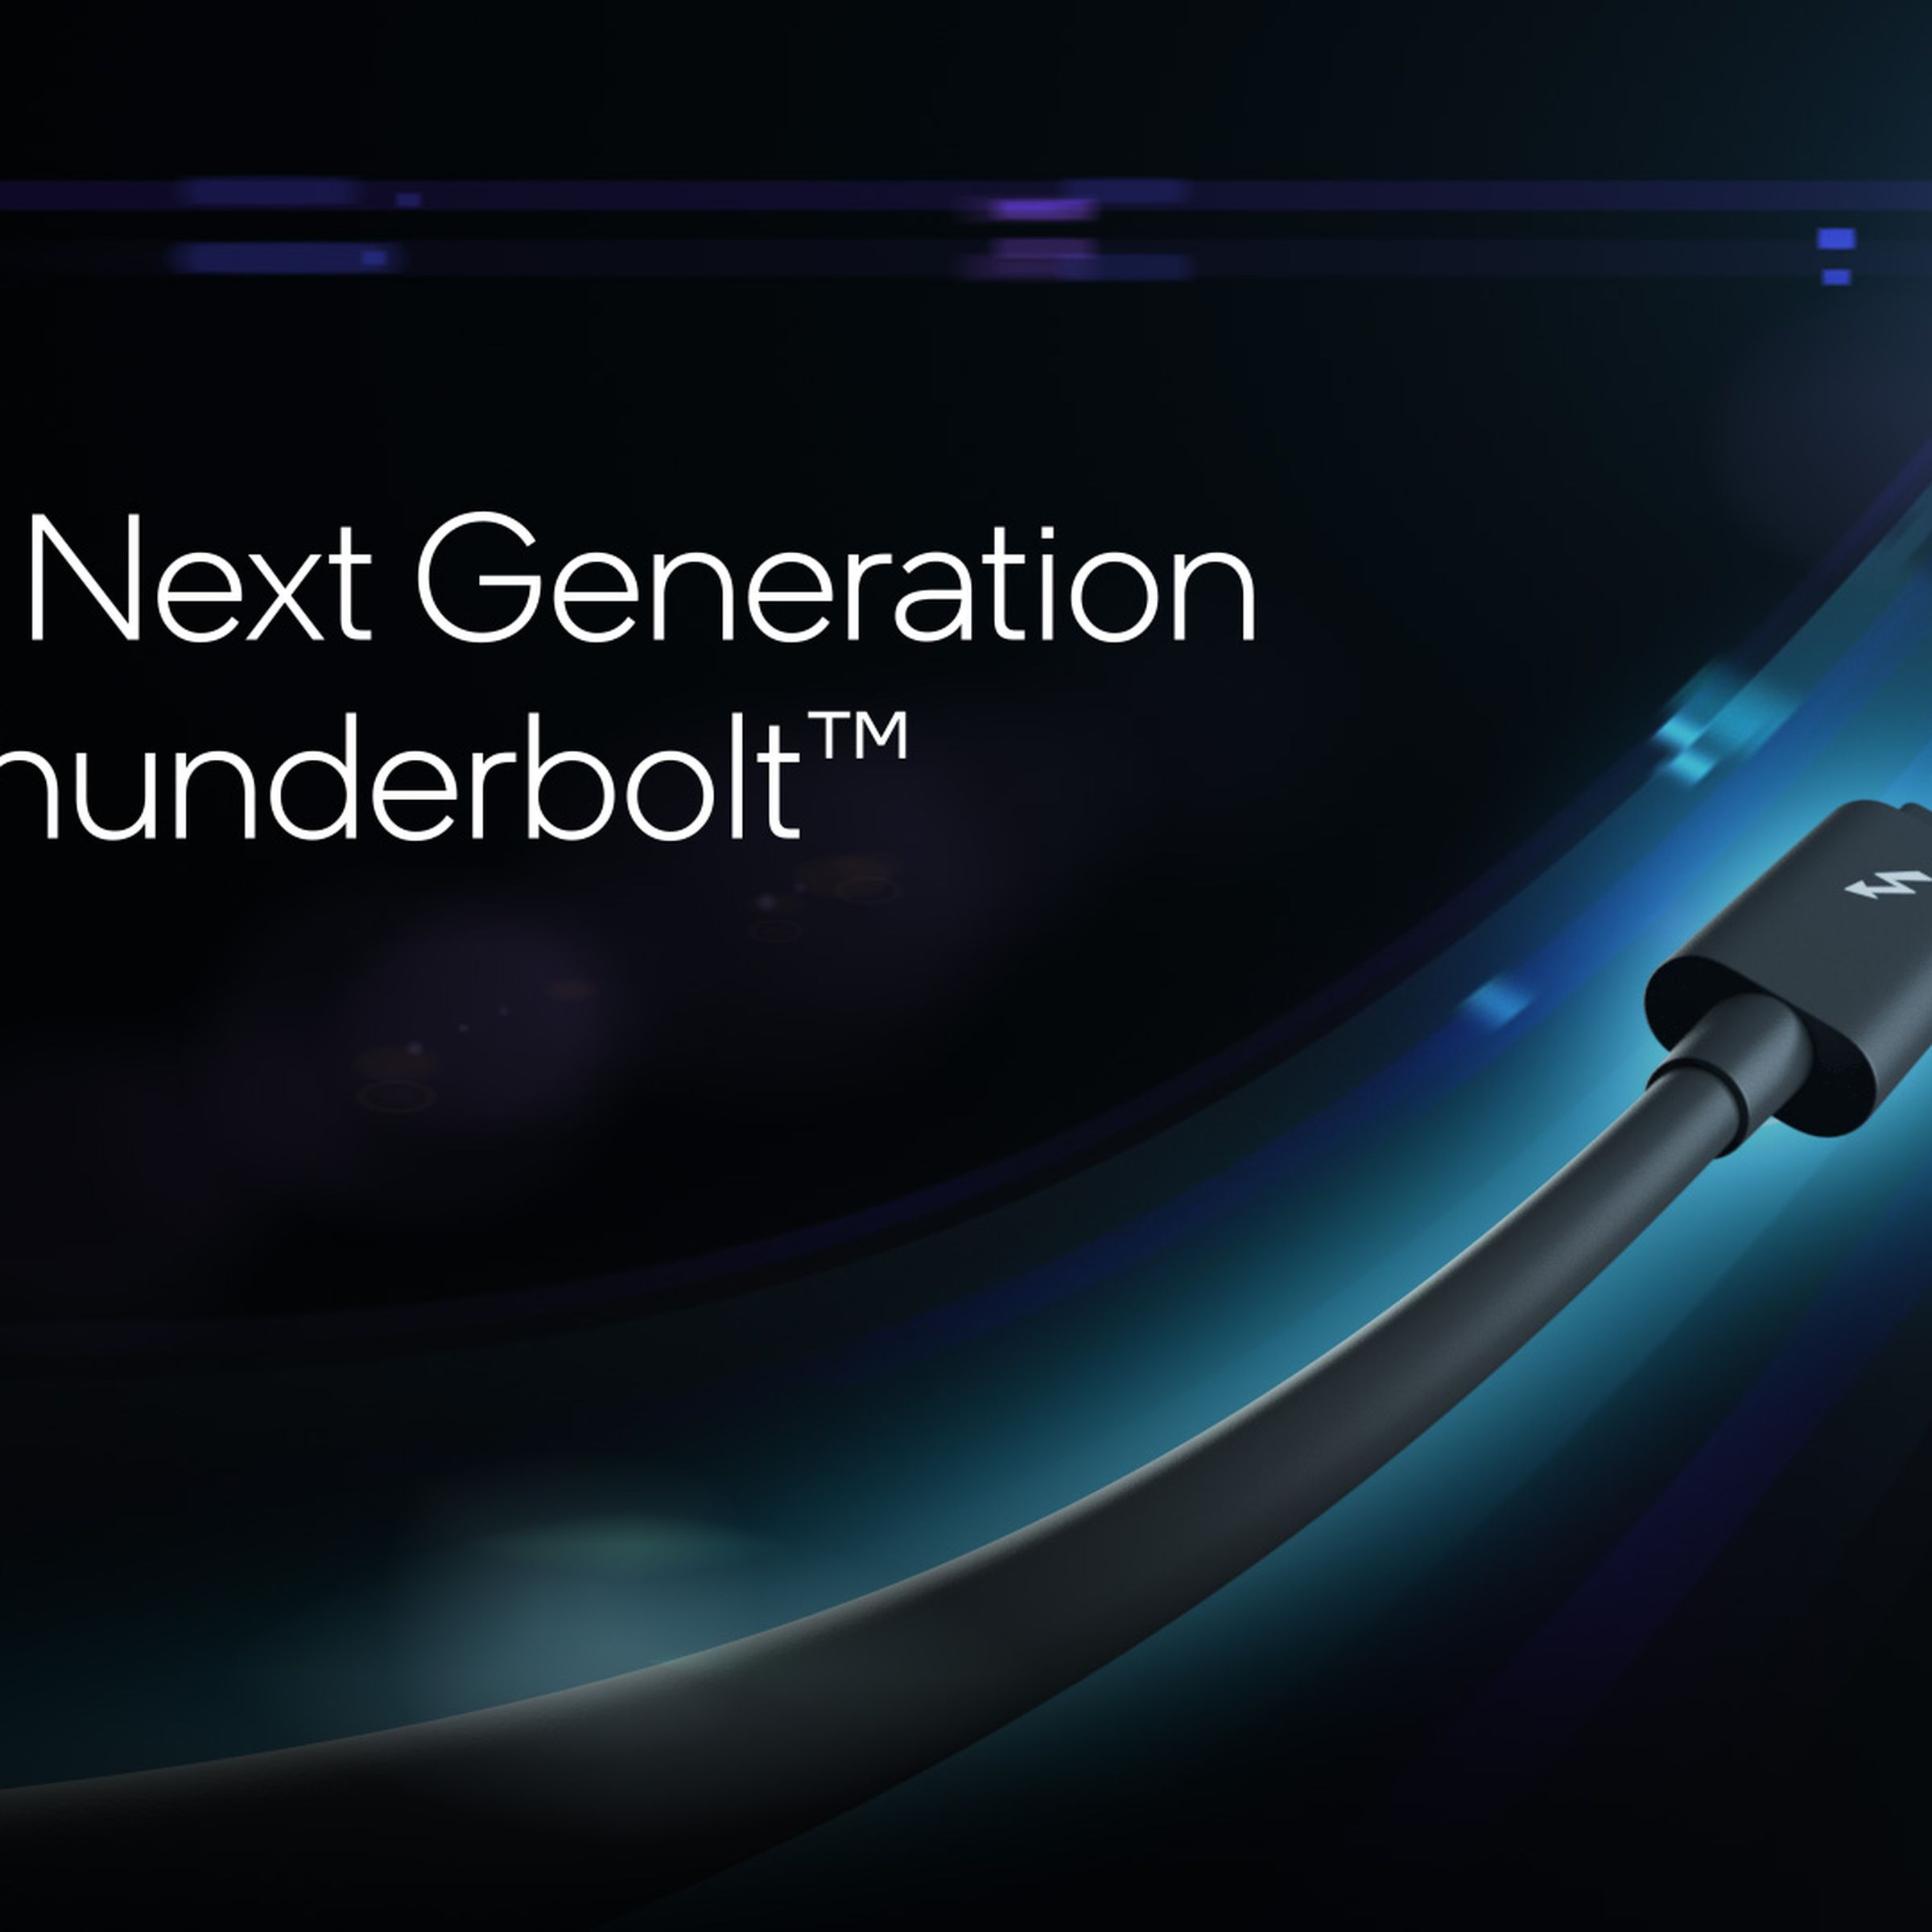 Illustration of a Thunderbolt cable, with the label “the next generation of Thunderbolt.”